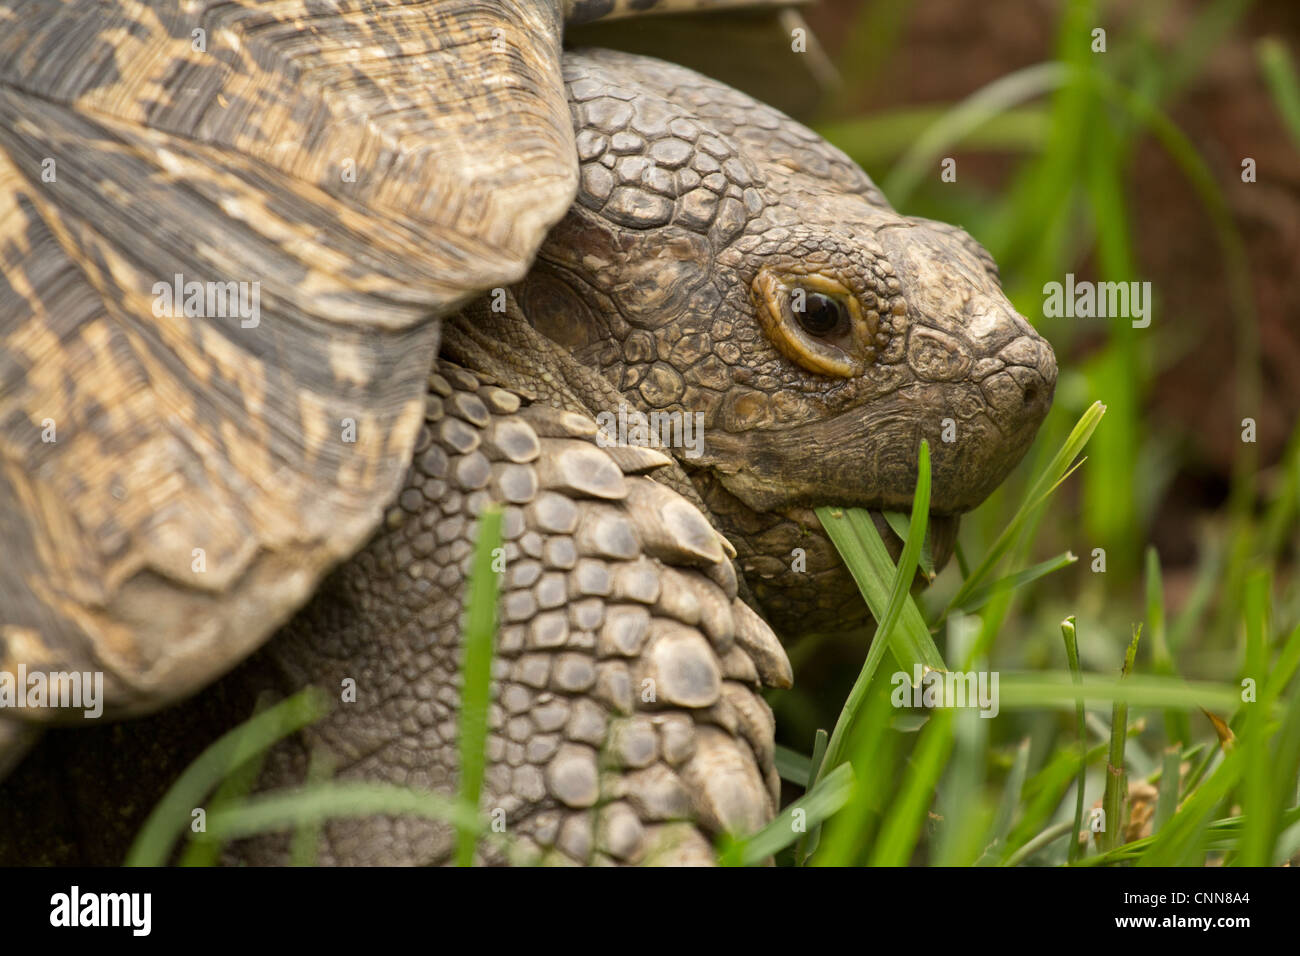 A turtle chewing on grass it just ate Stock Photo